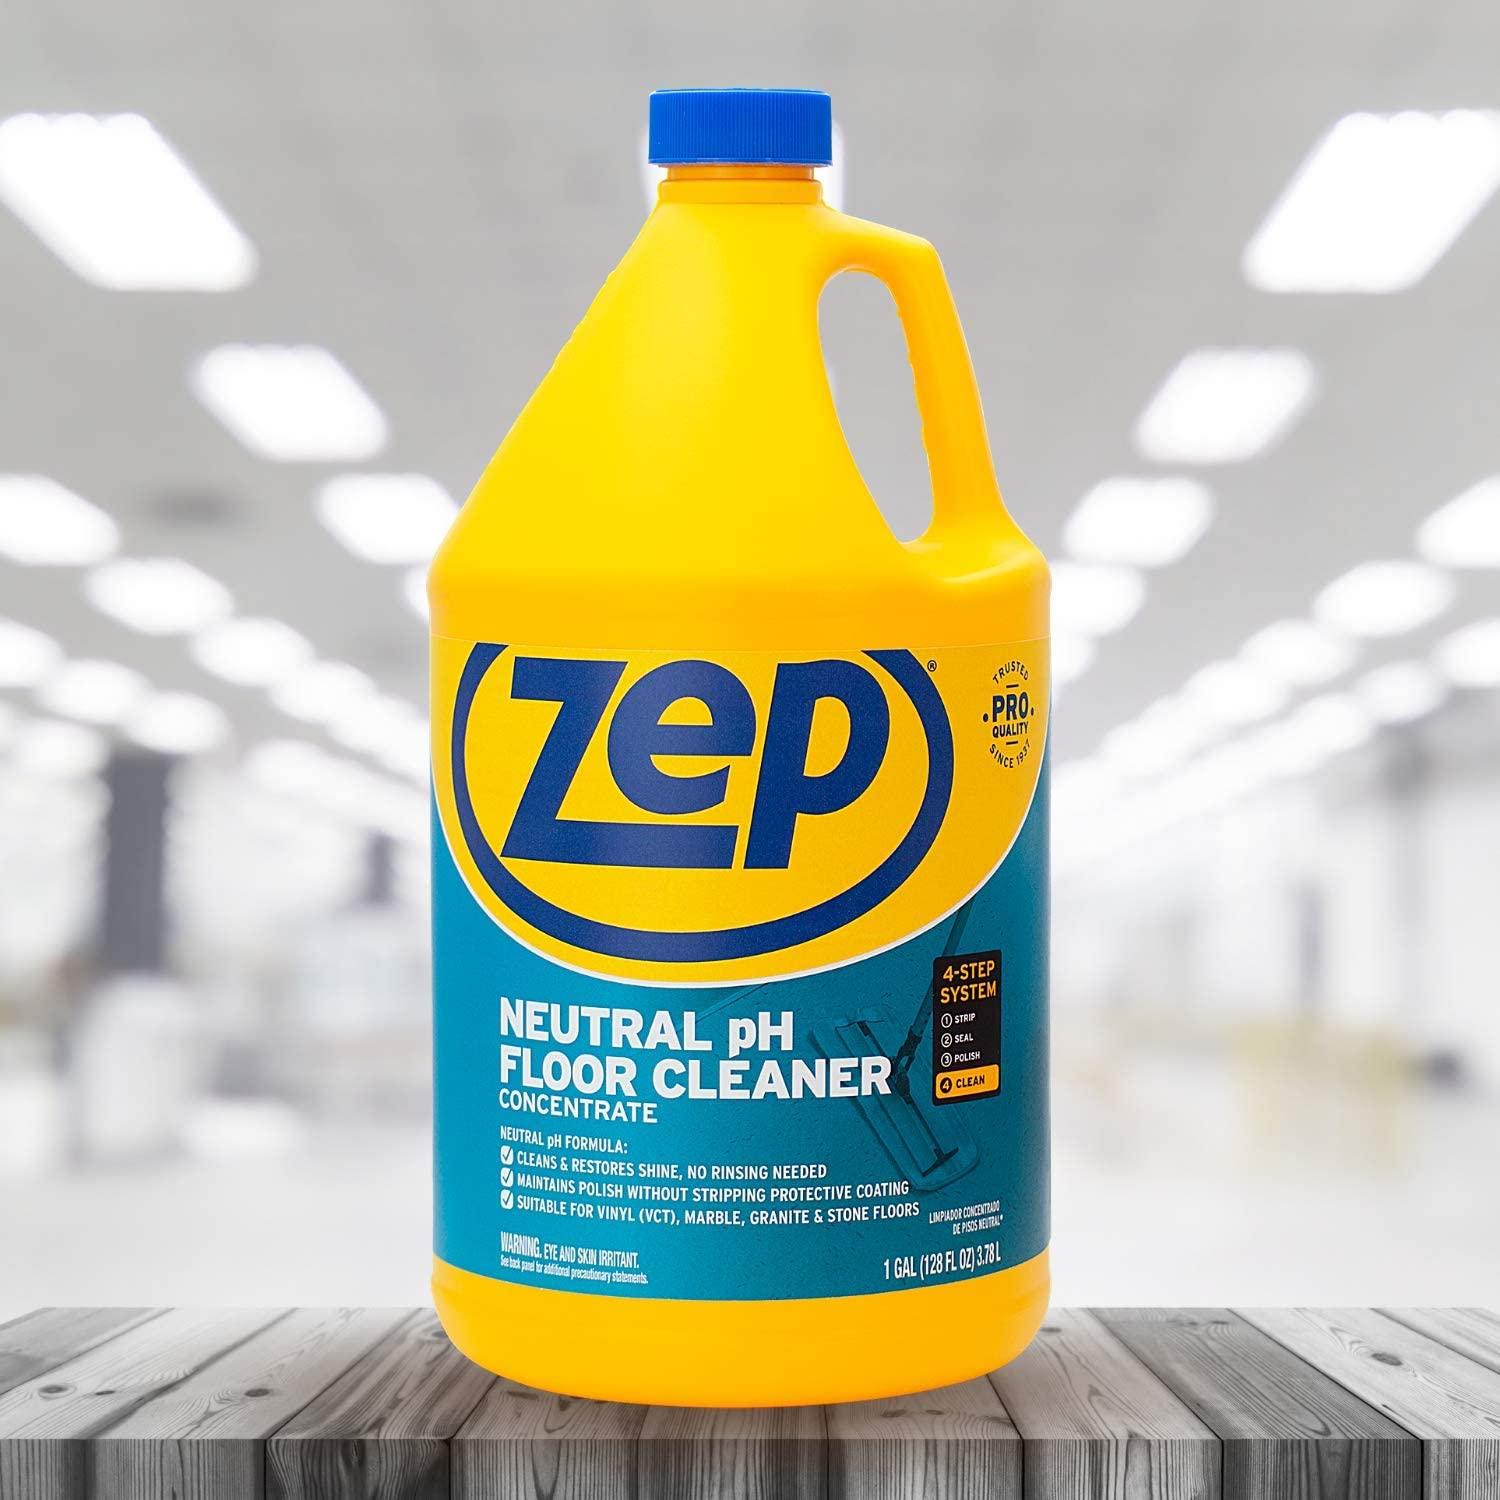 1 GALLON OF ZEP DEGREASER (4 TO A CASE)